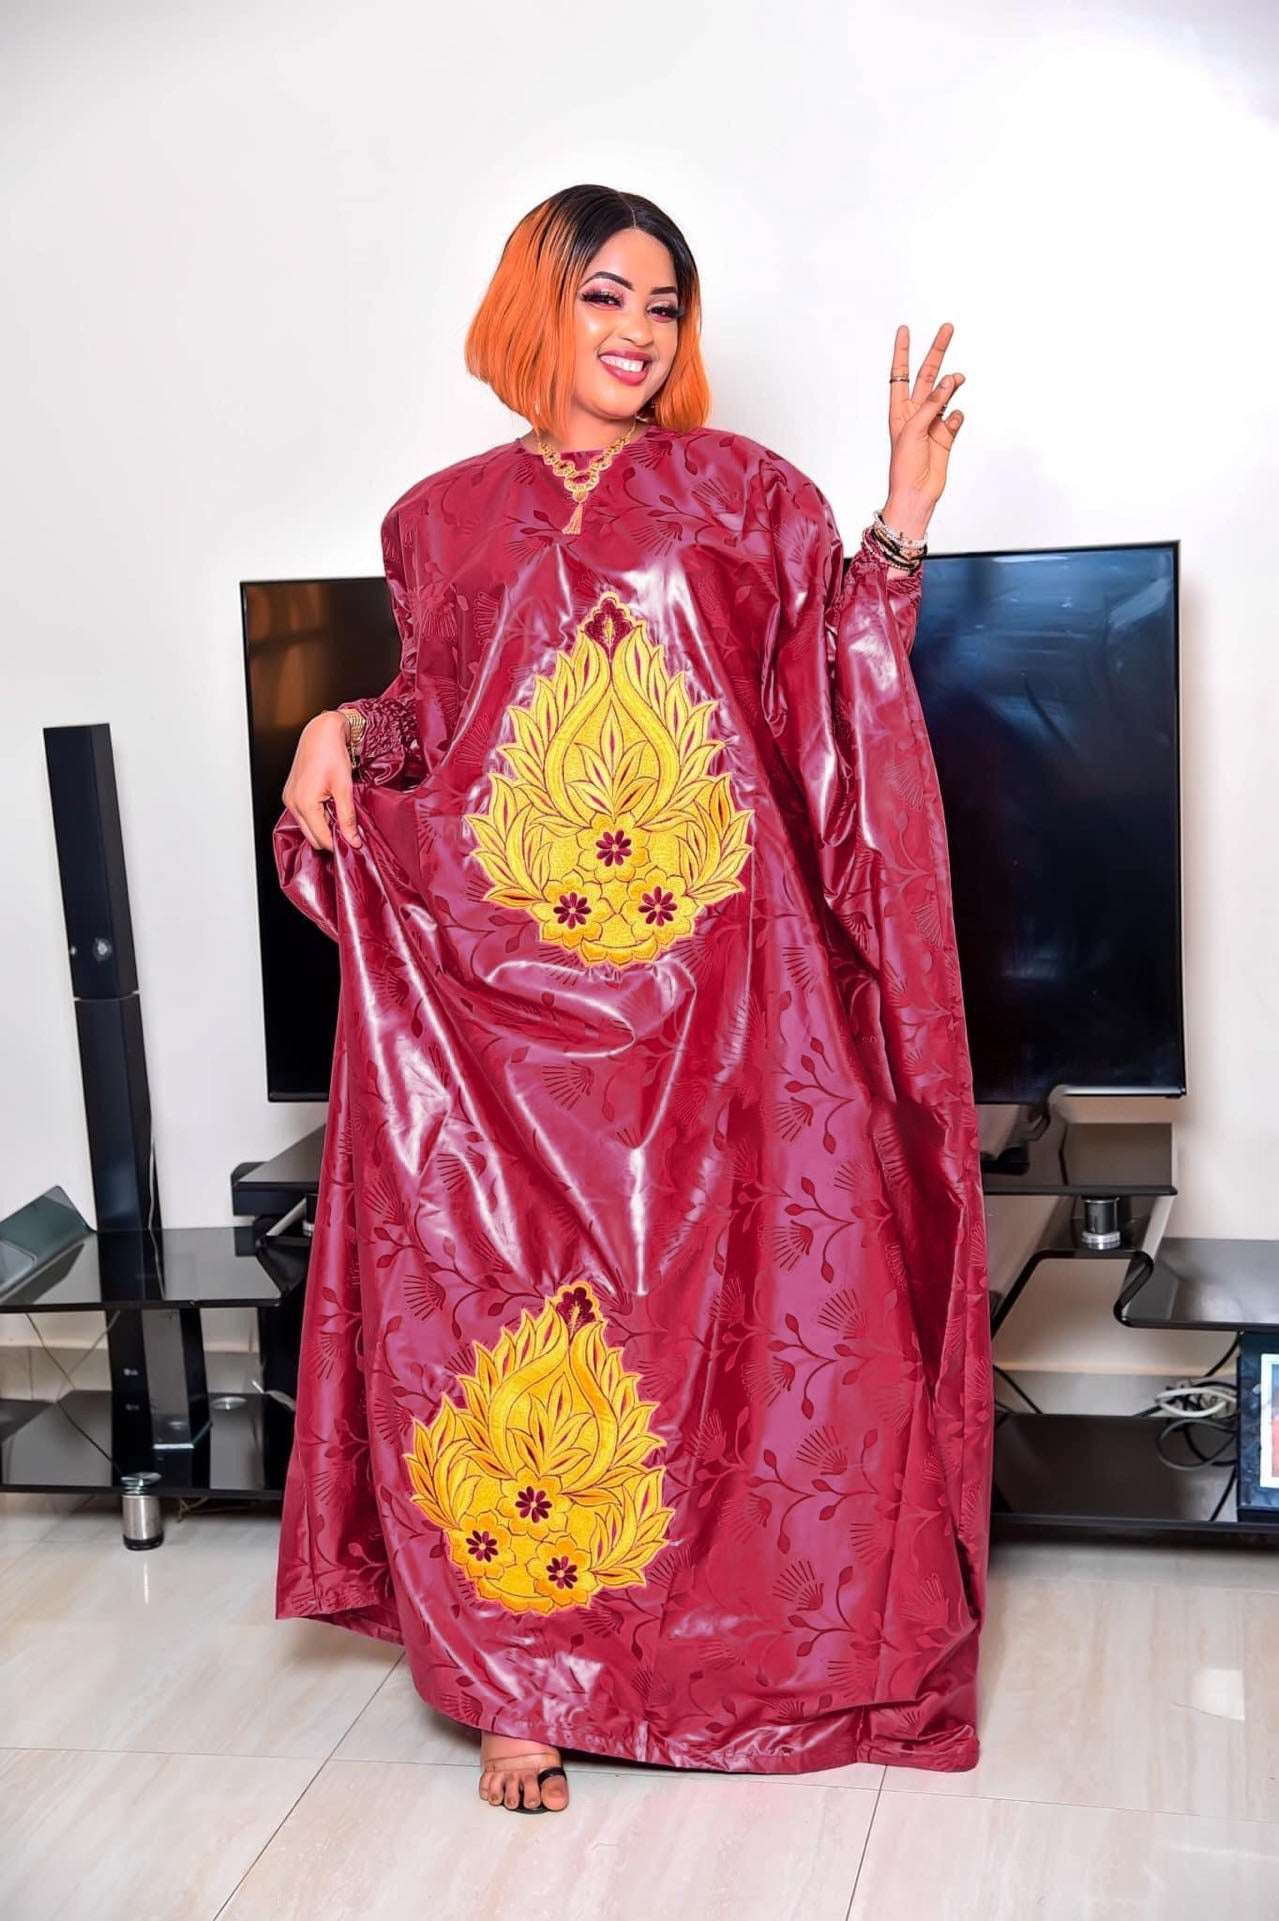 Woman Plus Size Dress Embroidery With Floor Long Dress With Scarf - Flexi Africa Free Delivery Worldwide www.flexiafrica.com